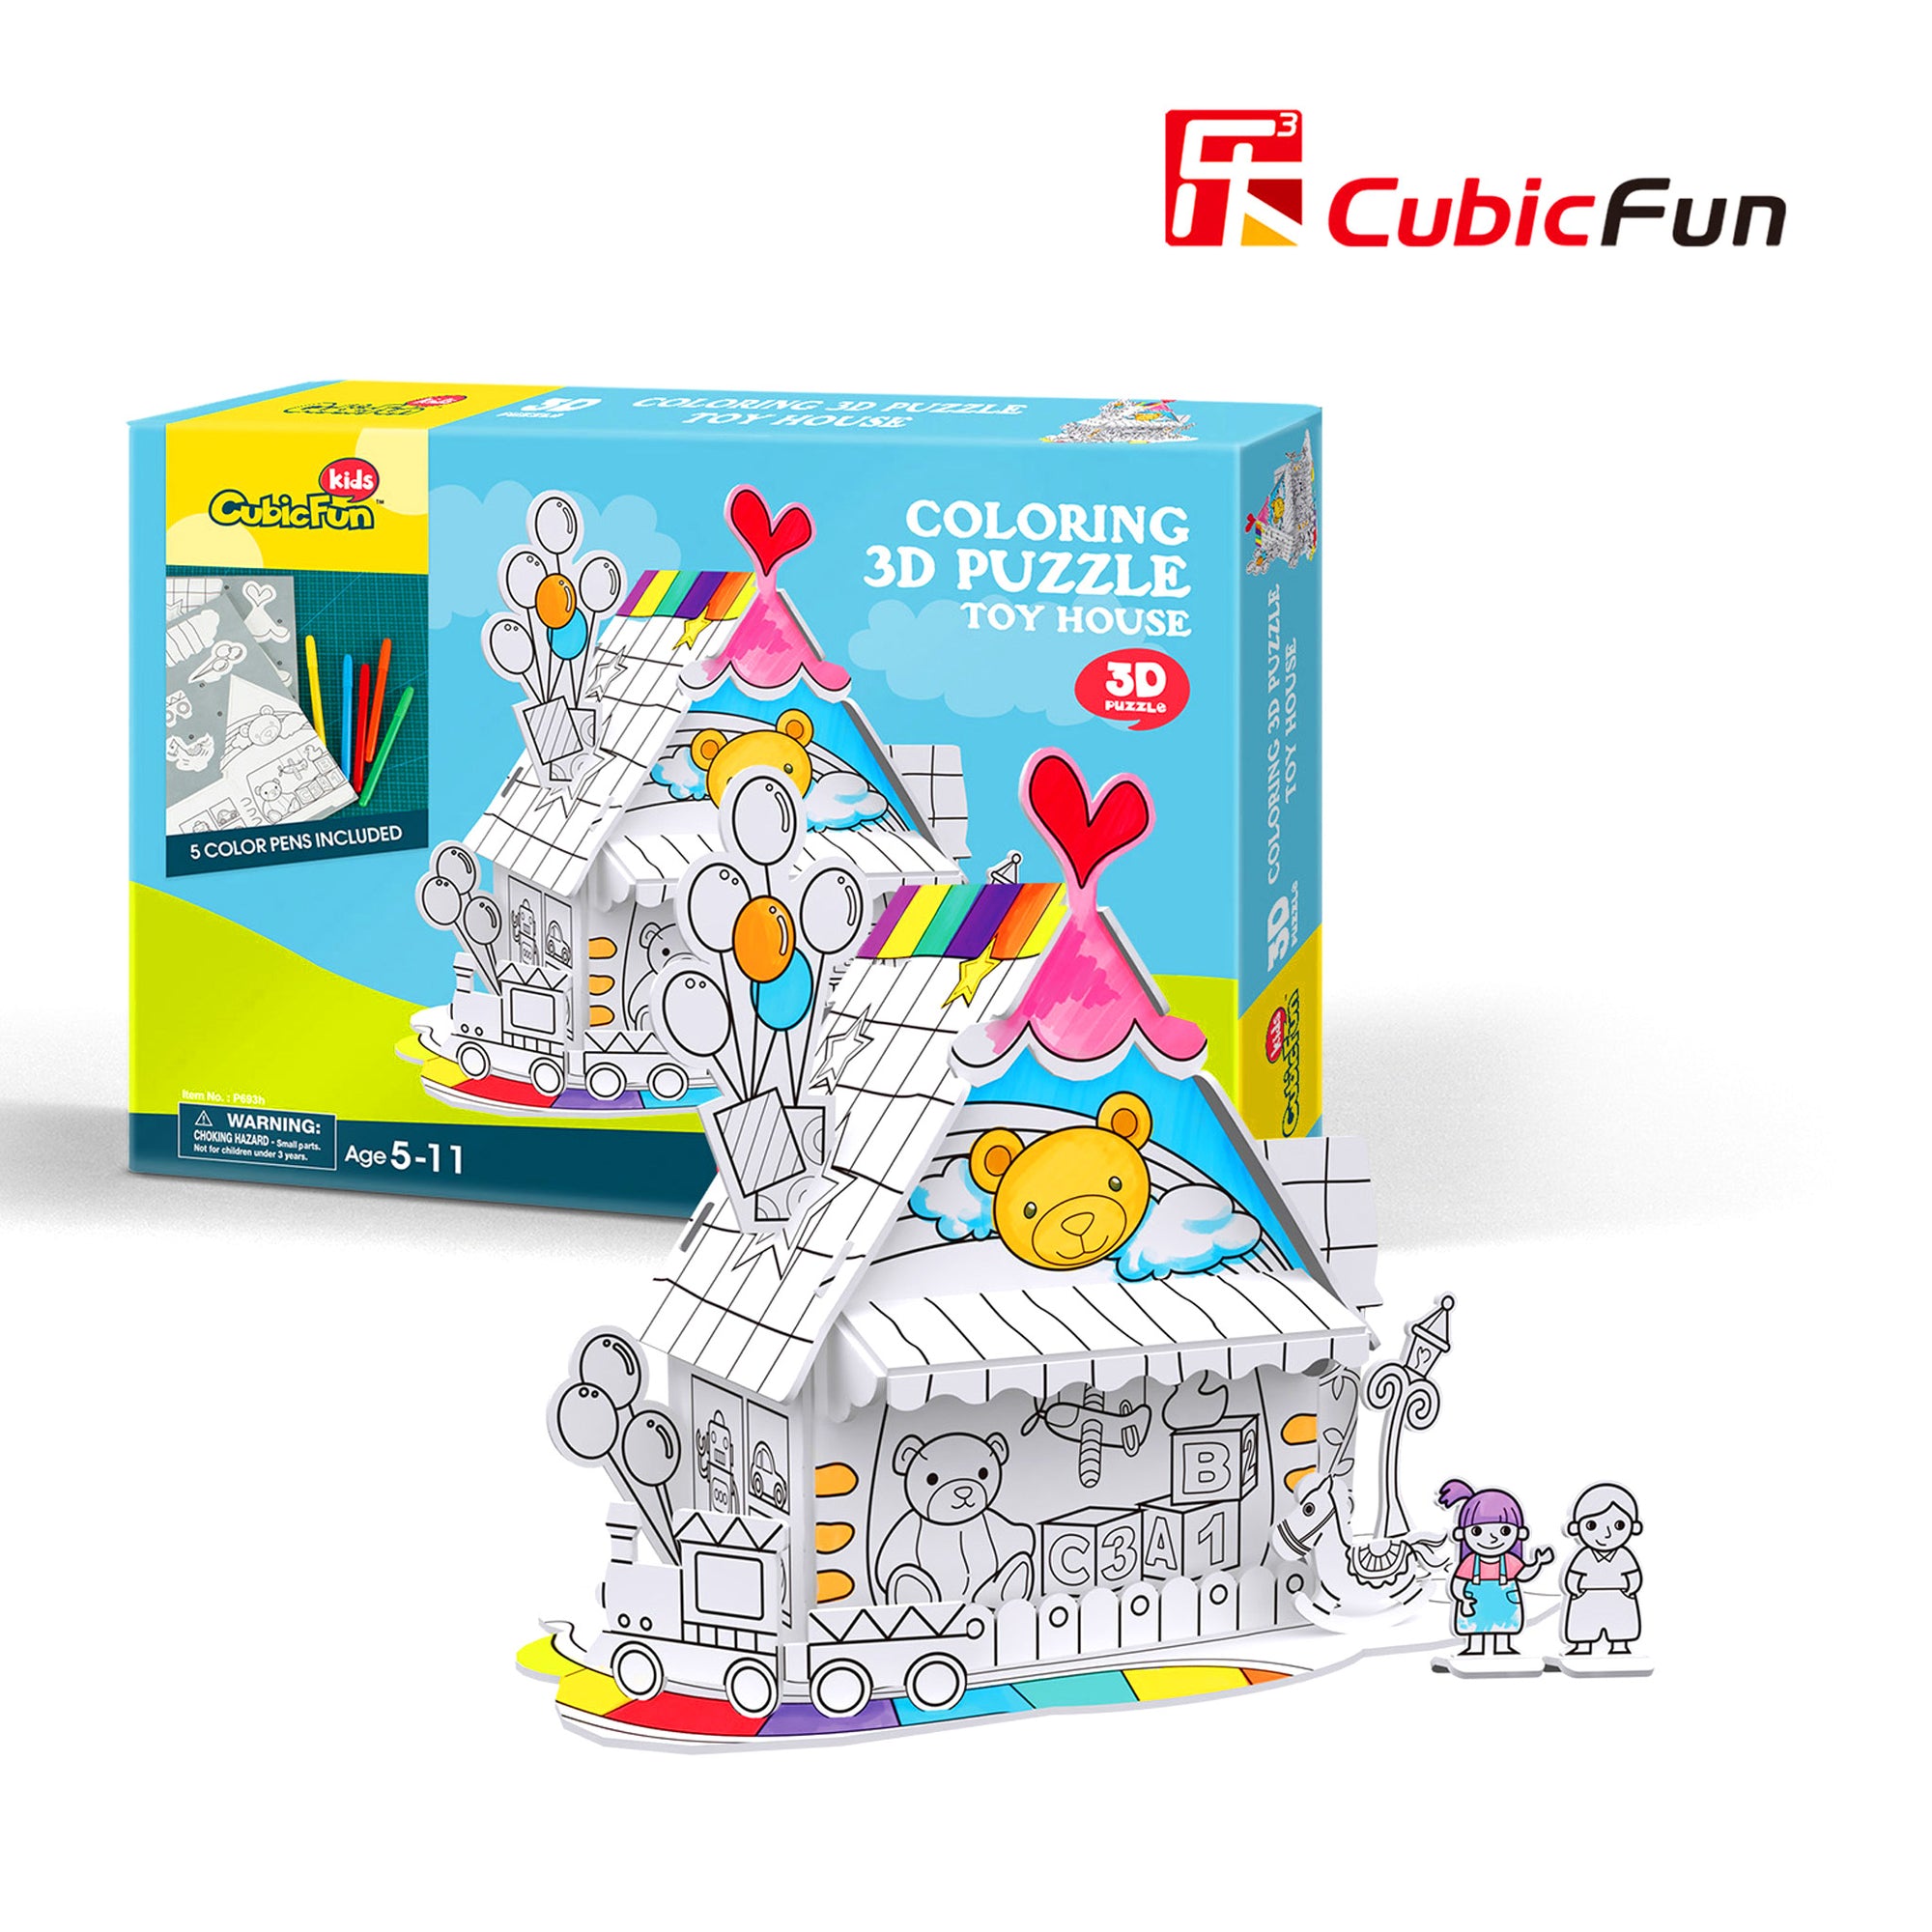 Colouring 3D Puzzle, Toy House